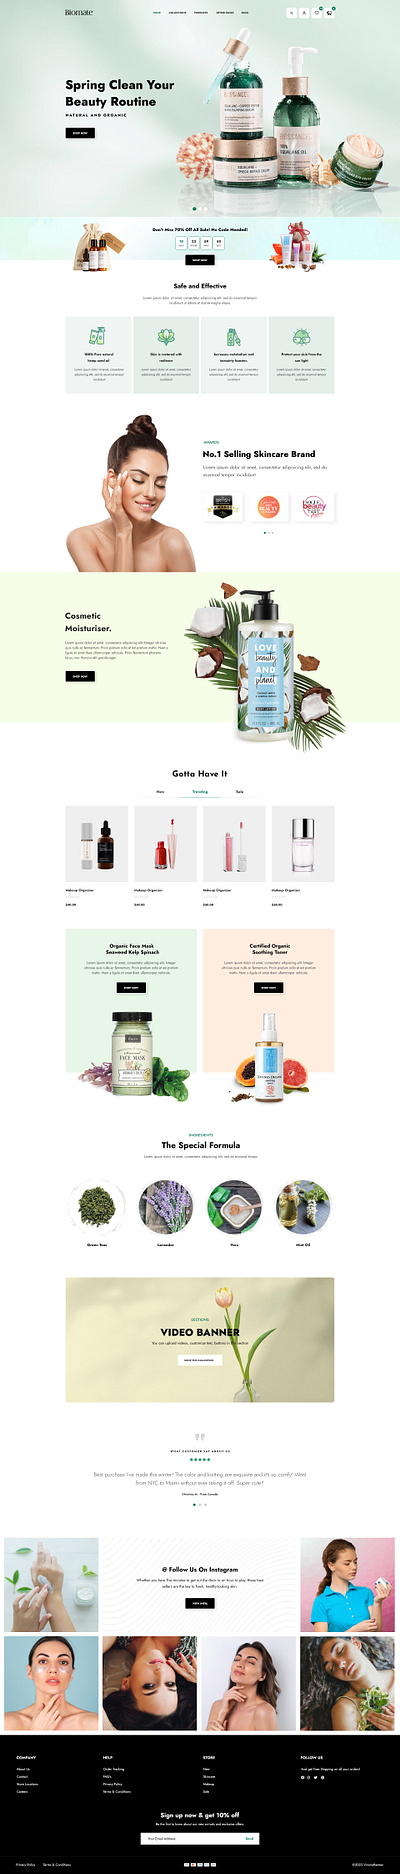 Mate - Beauty & Cosmetics Shopify Theme cosmetic design dropshipping illustration shopify shopify store shopify template shopify theme ui web design website design